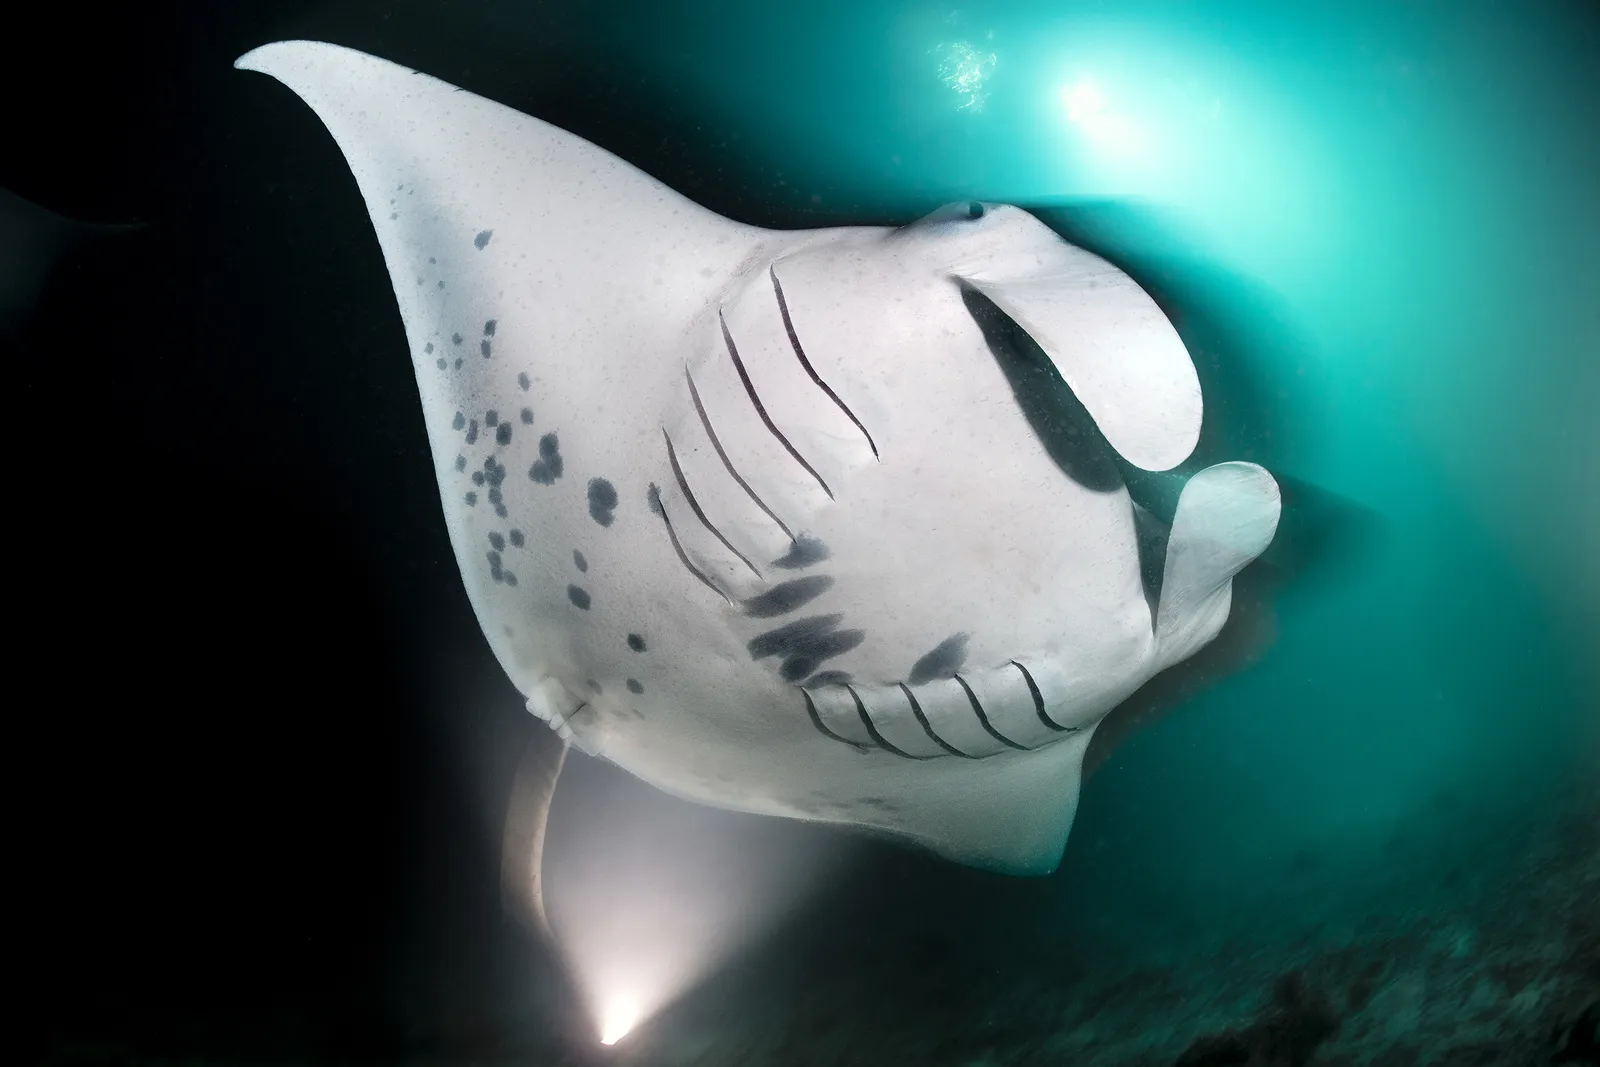 Why Conservationists Are Hopeful About the Manta Ray’s Future